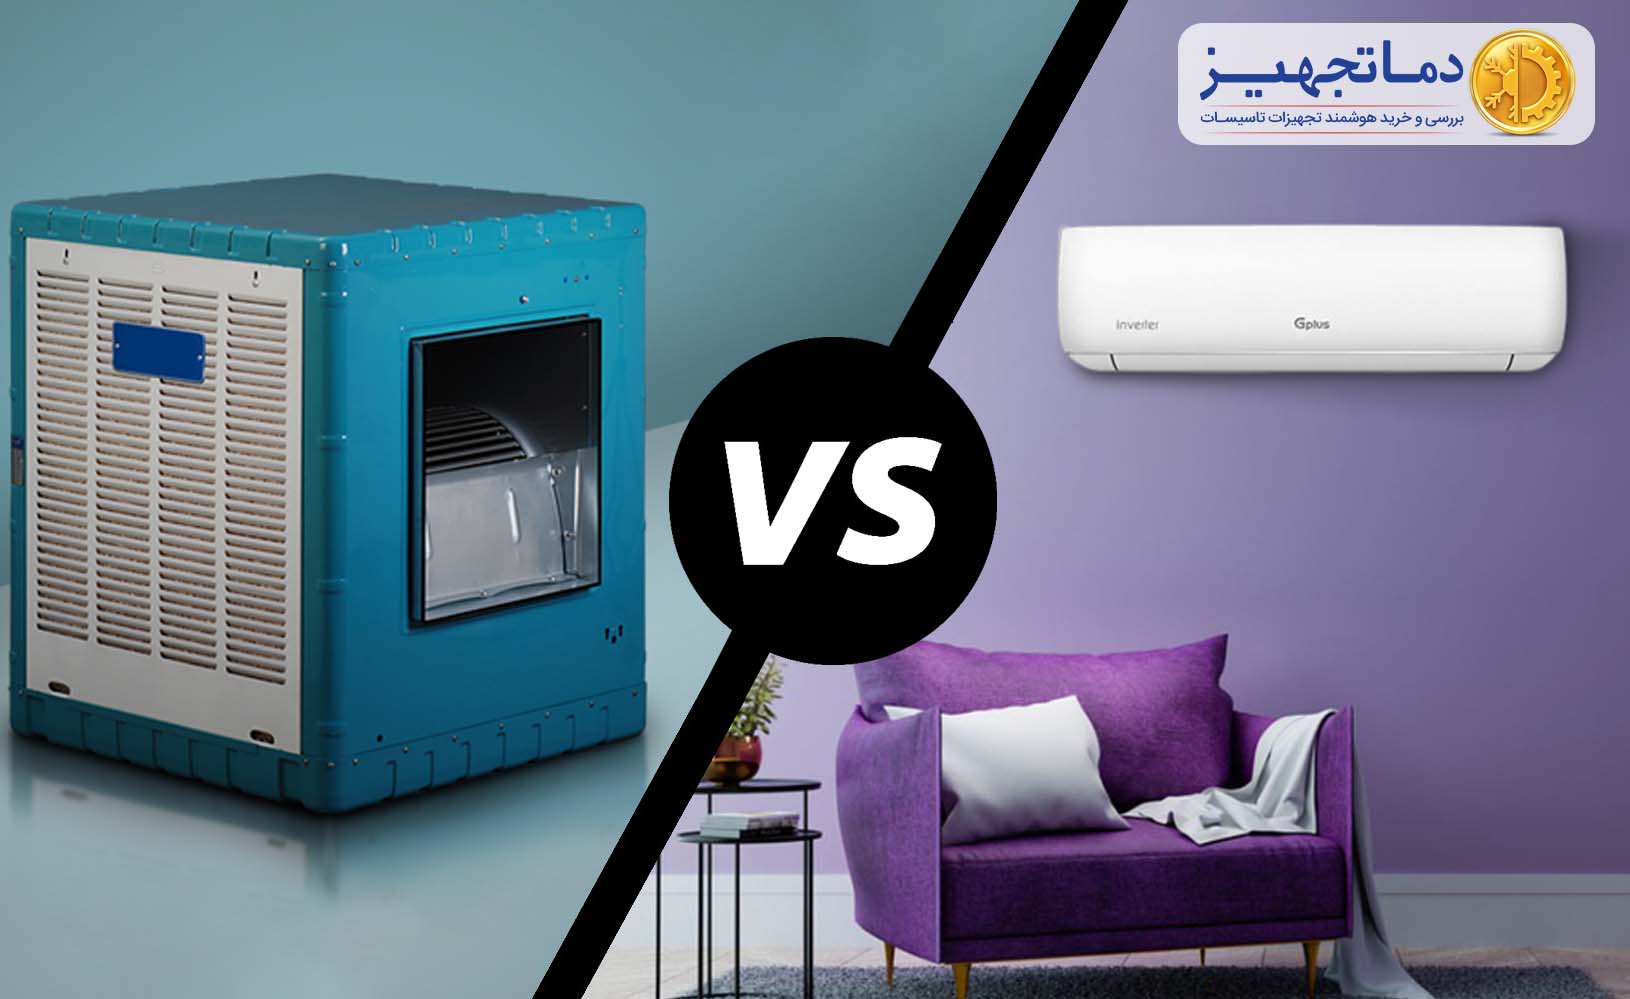 The difference between a EVAPORATIVE COOLER and a SPLIT AC UNIT